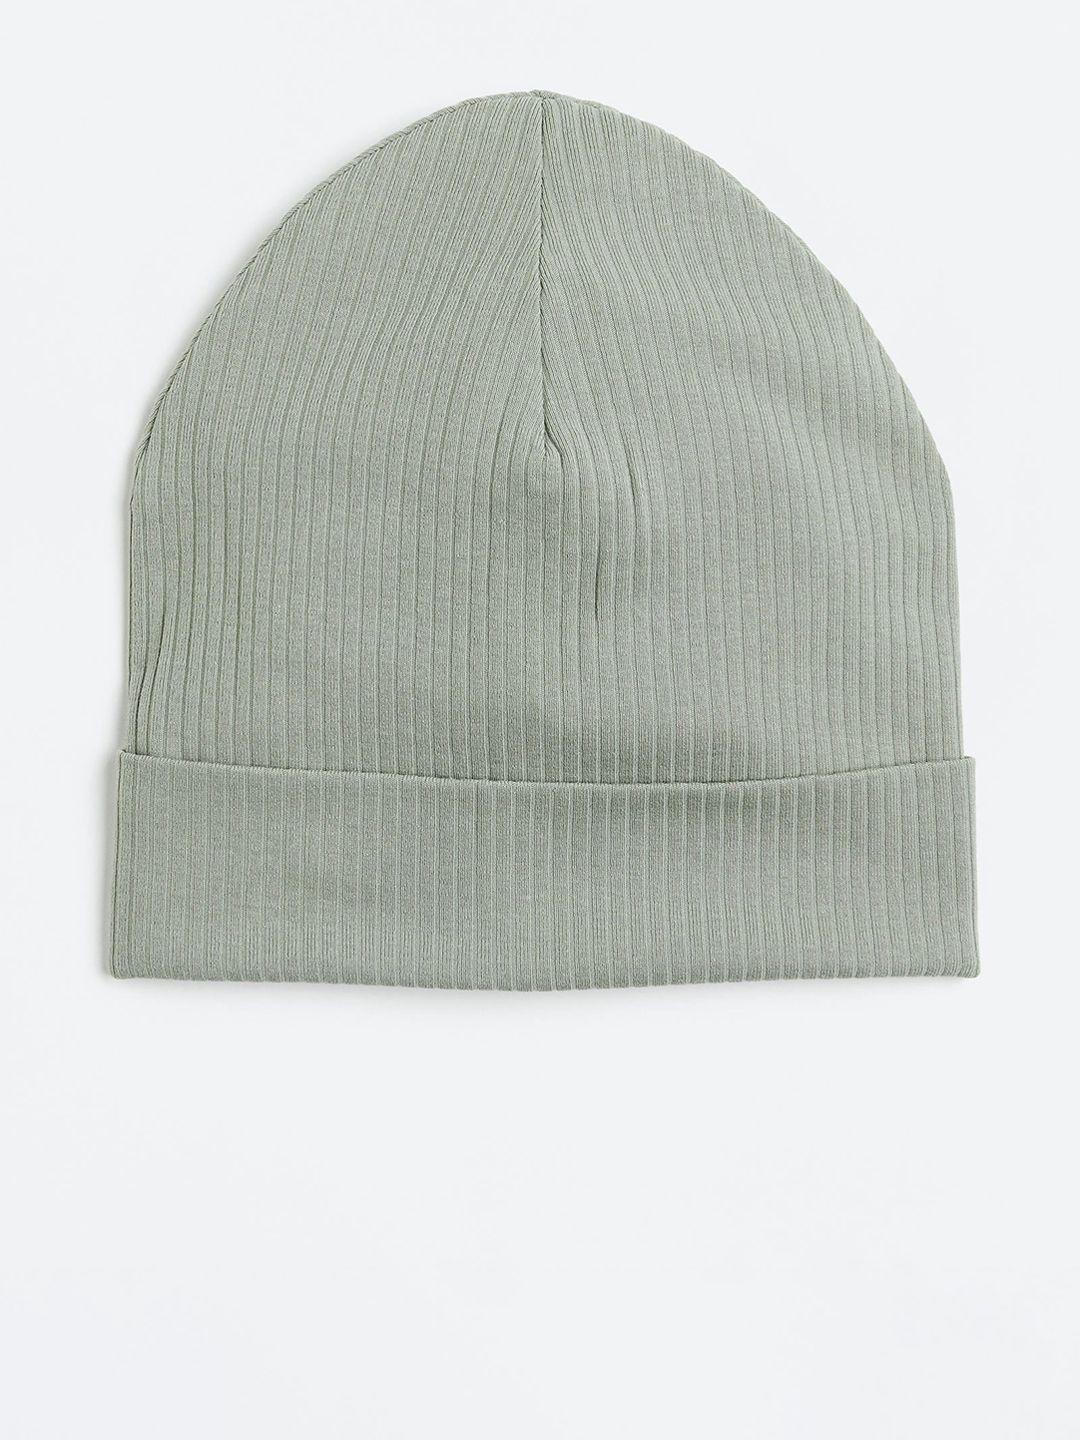 h&m boys ribbed jersey hat